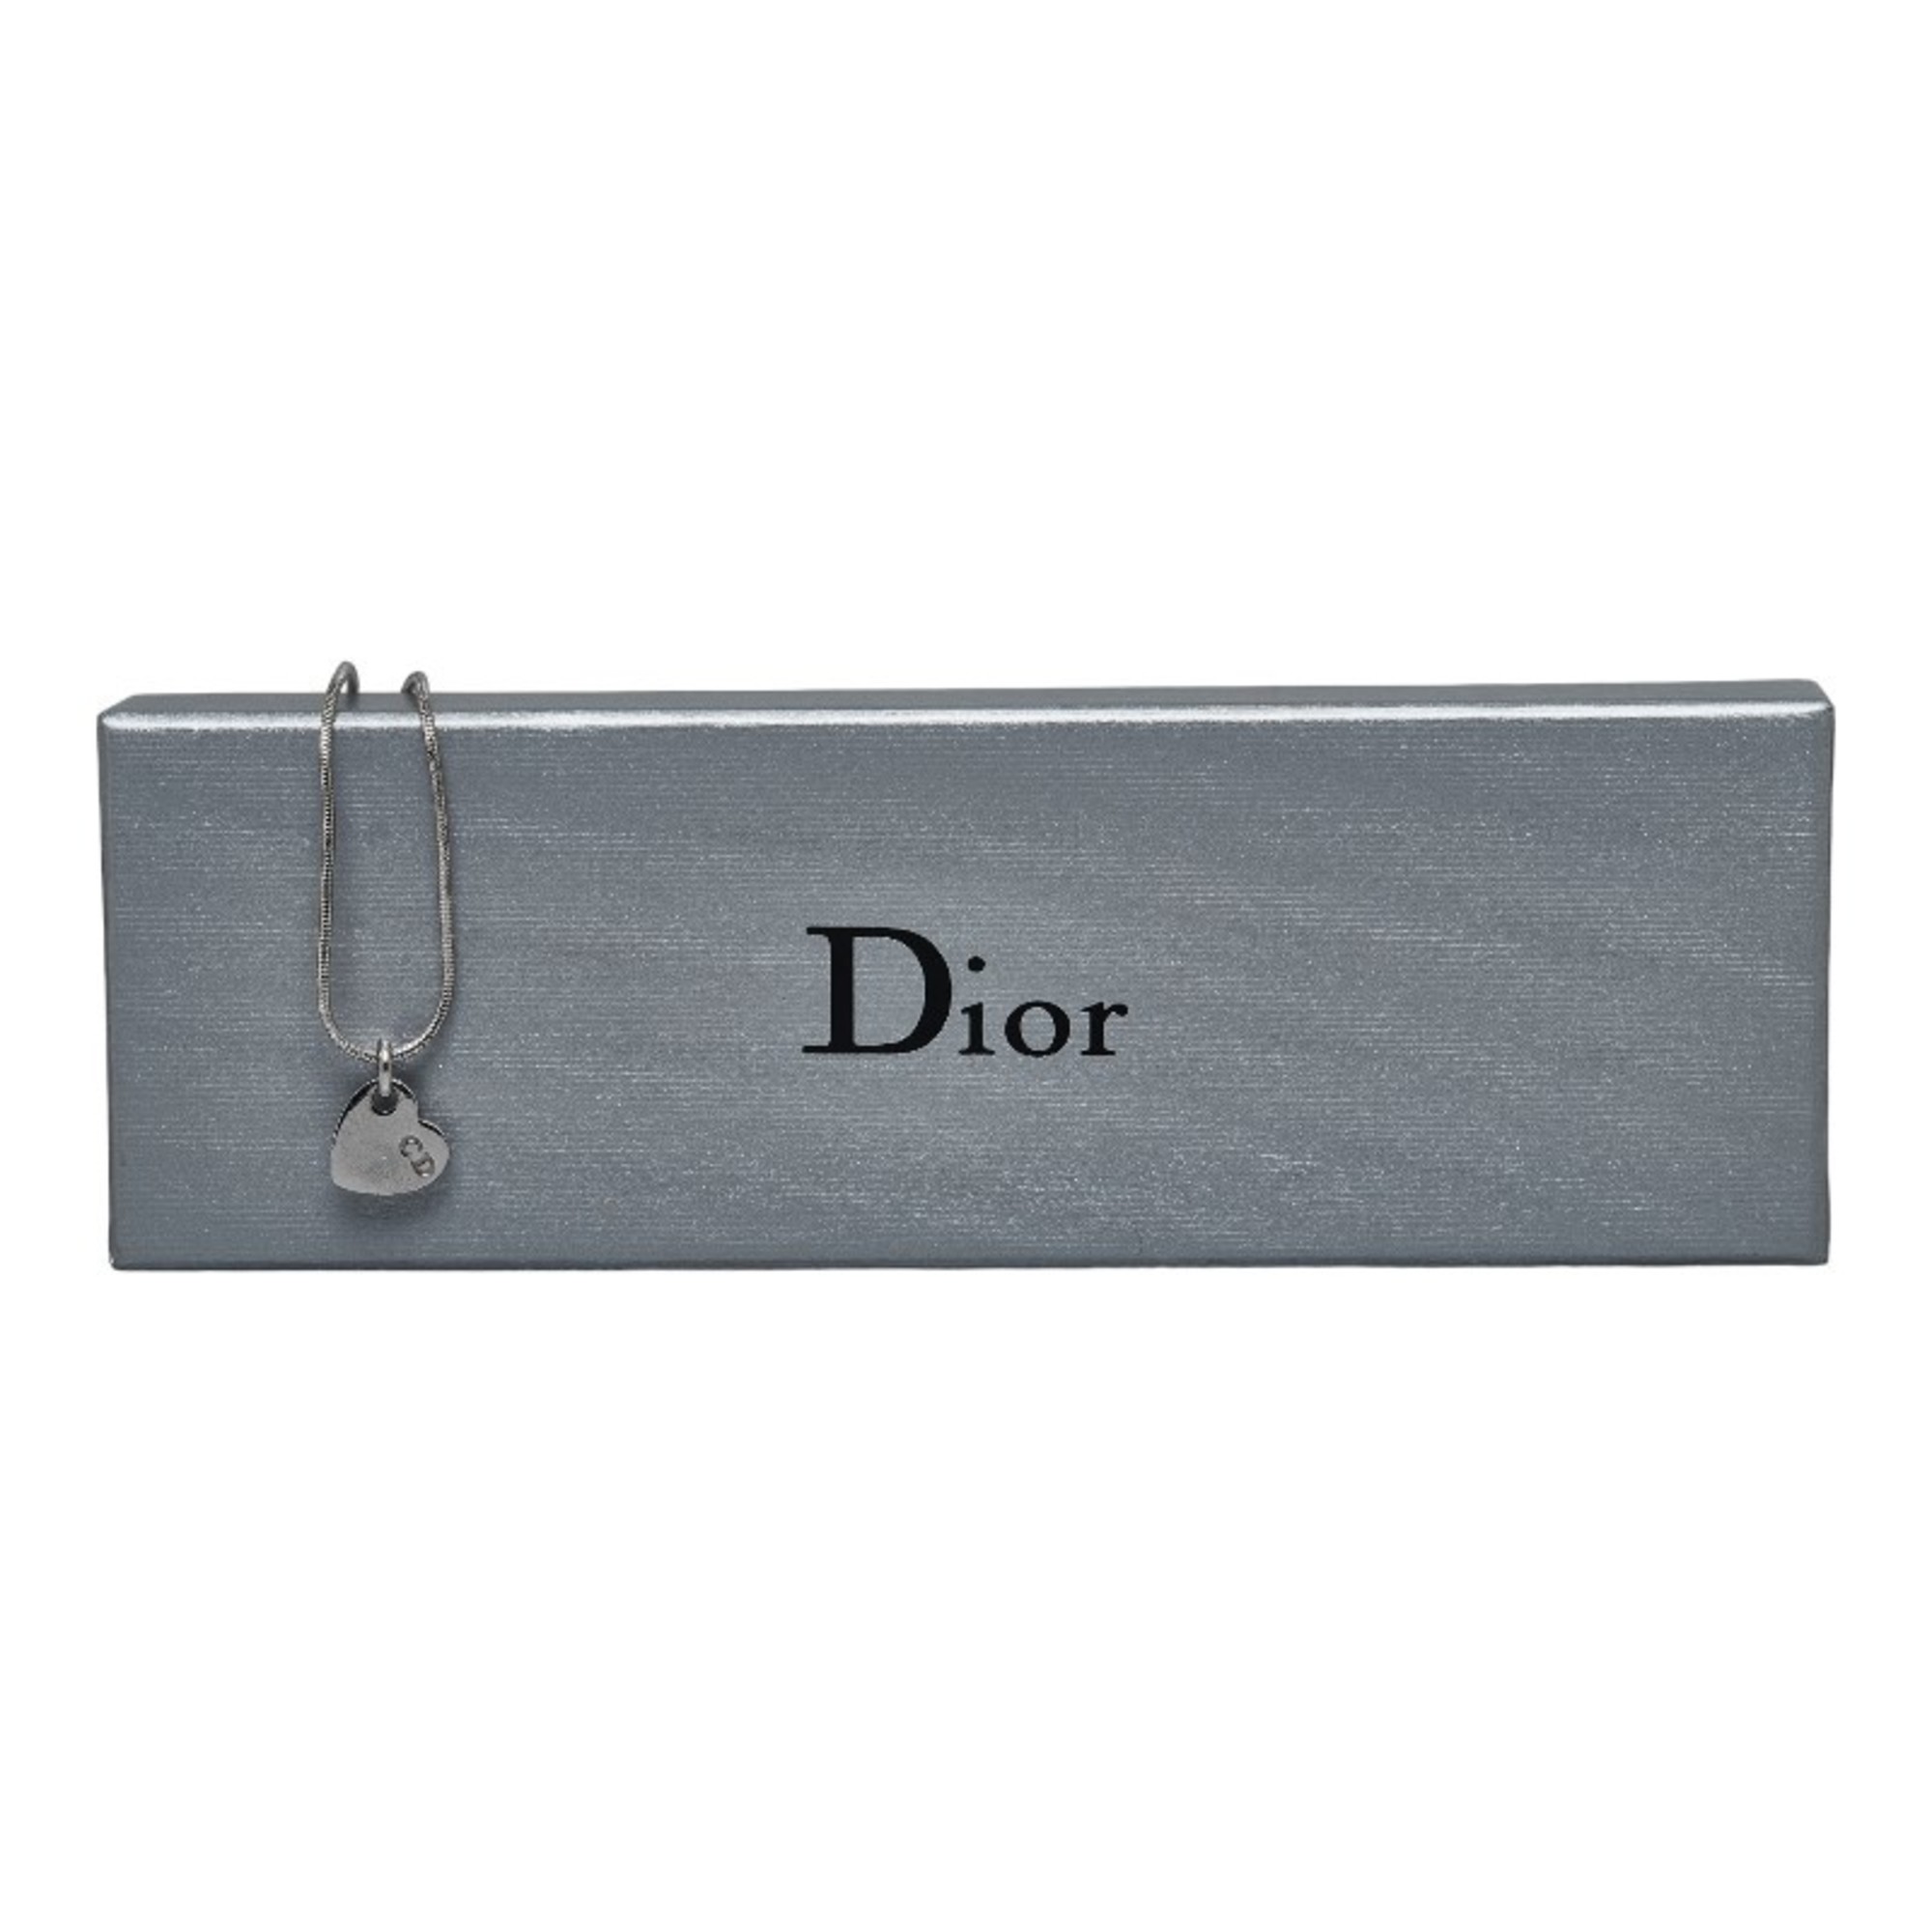 Christian Dior Dior heart necklace silver metal ladies